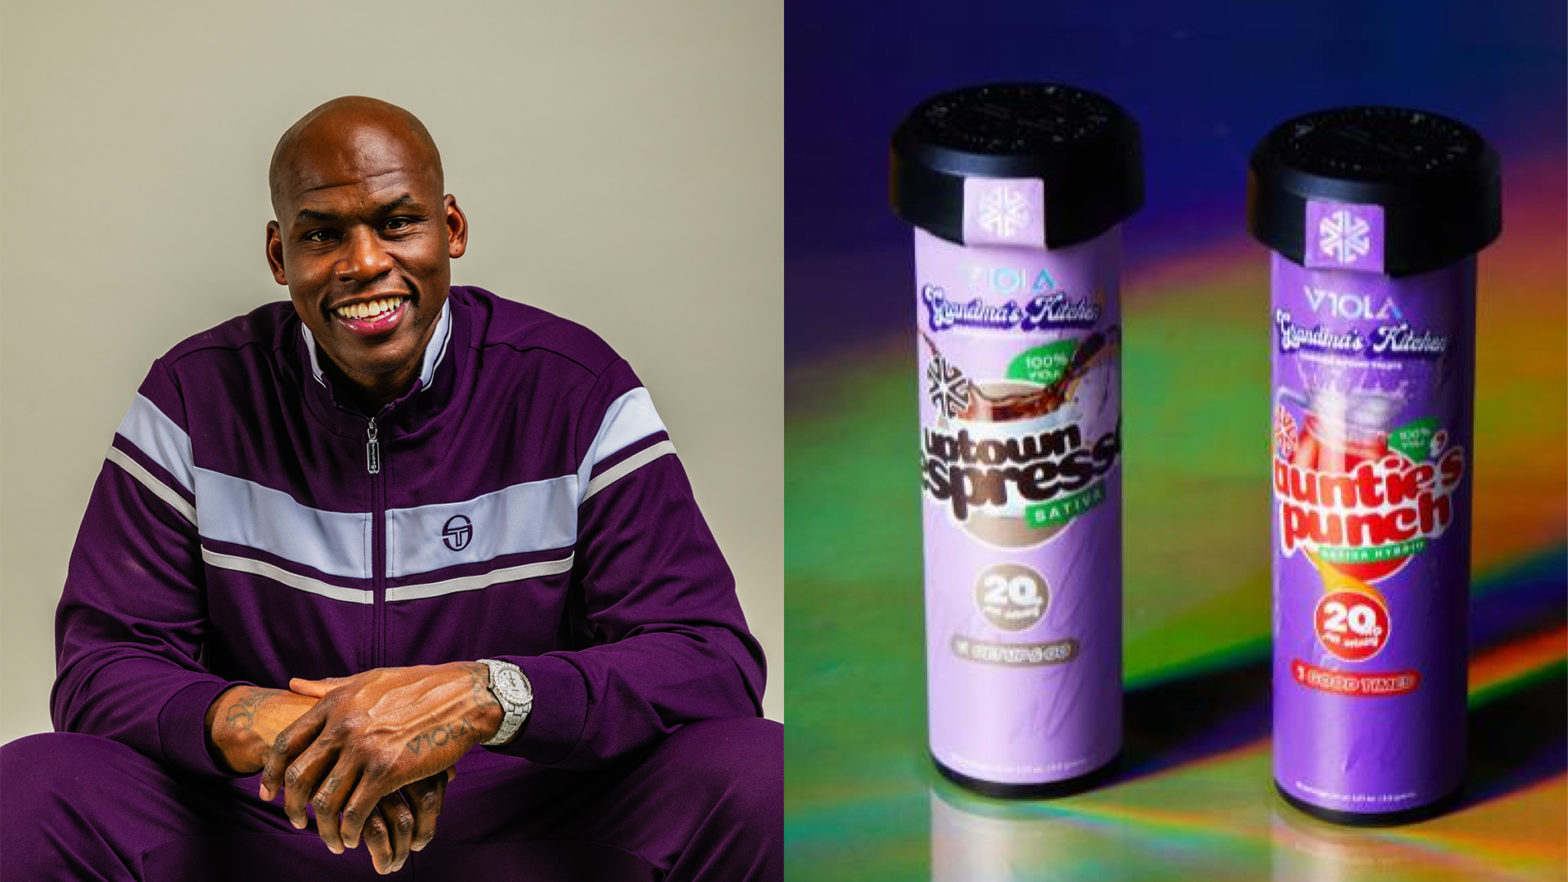 Al Harrington's Viola Now Offers Edibles, And His Grandma Is The Reason Behind It